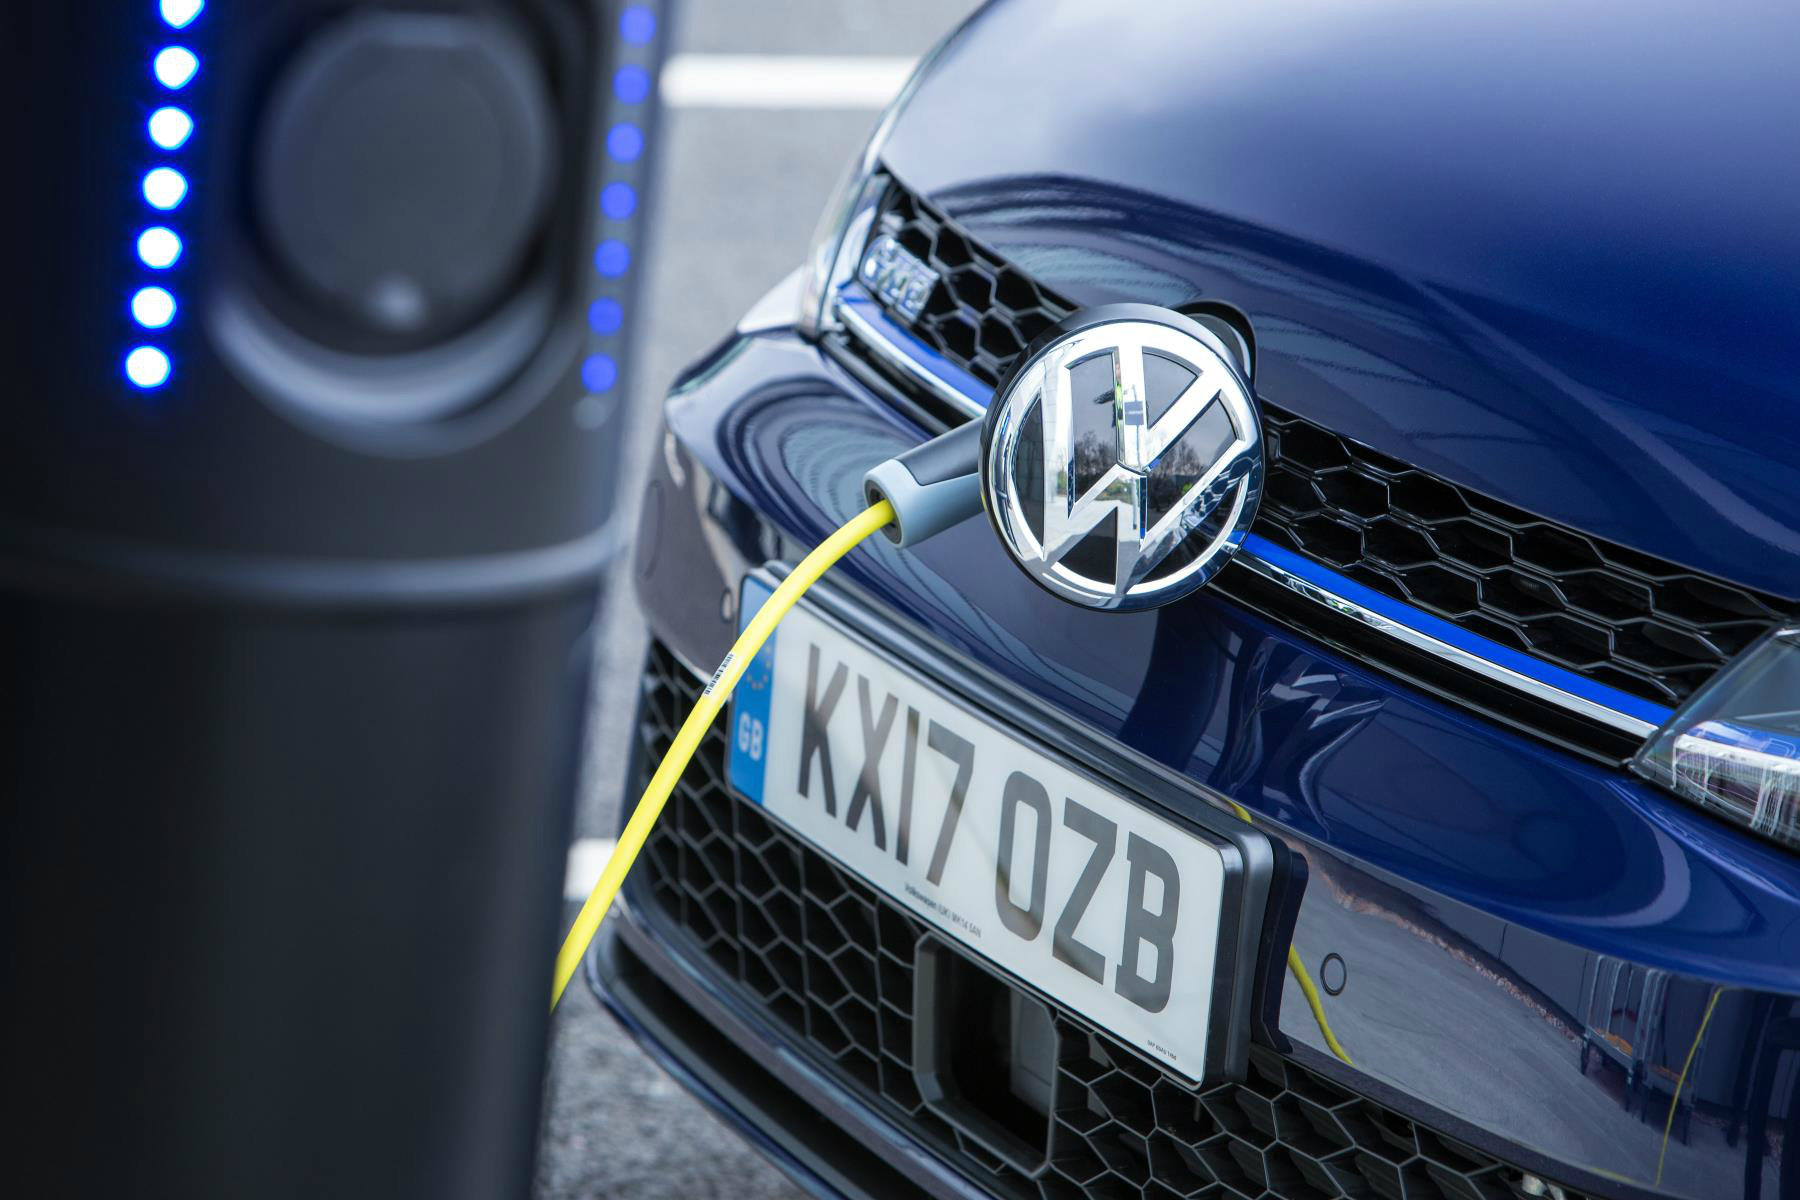 How popular are hybrid and electric cars in the UK?